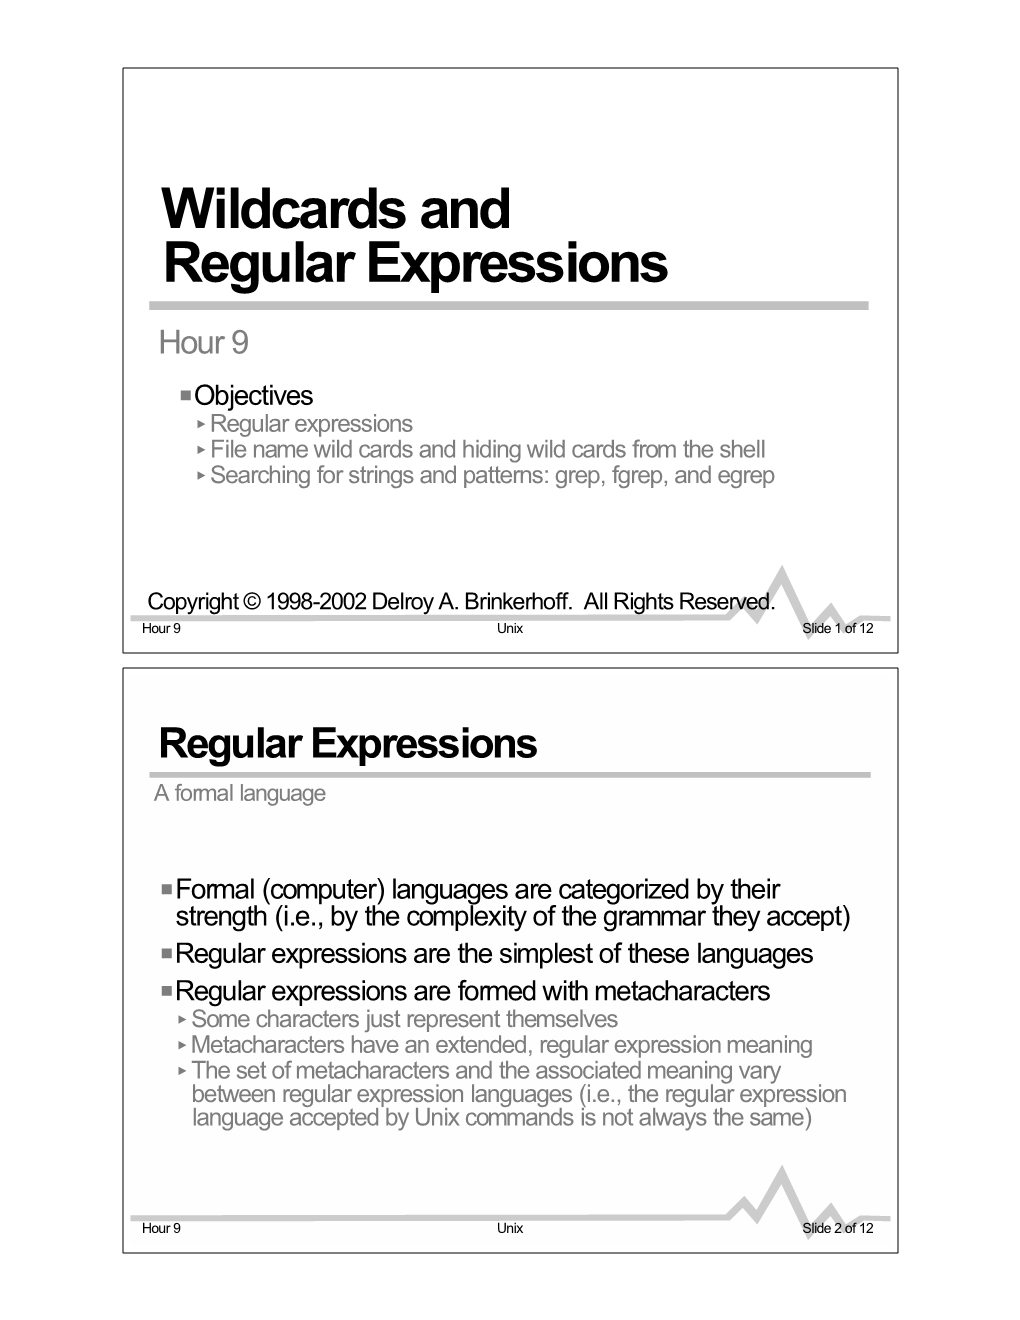 Wildcards and Regular Expressions.Shw